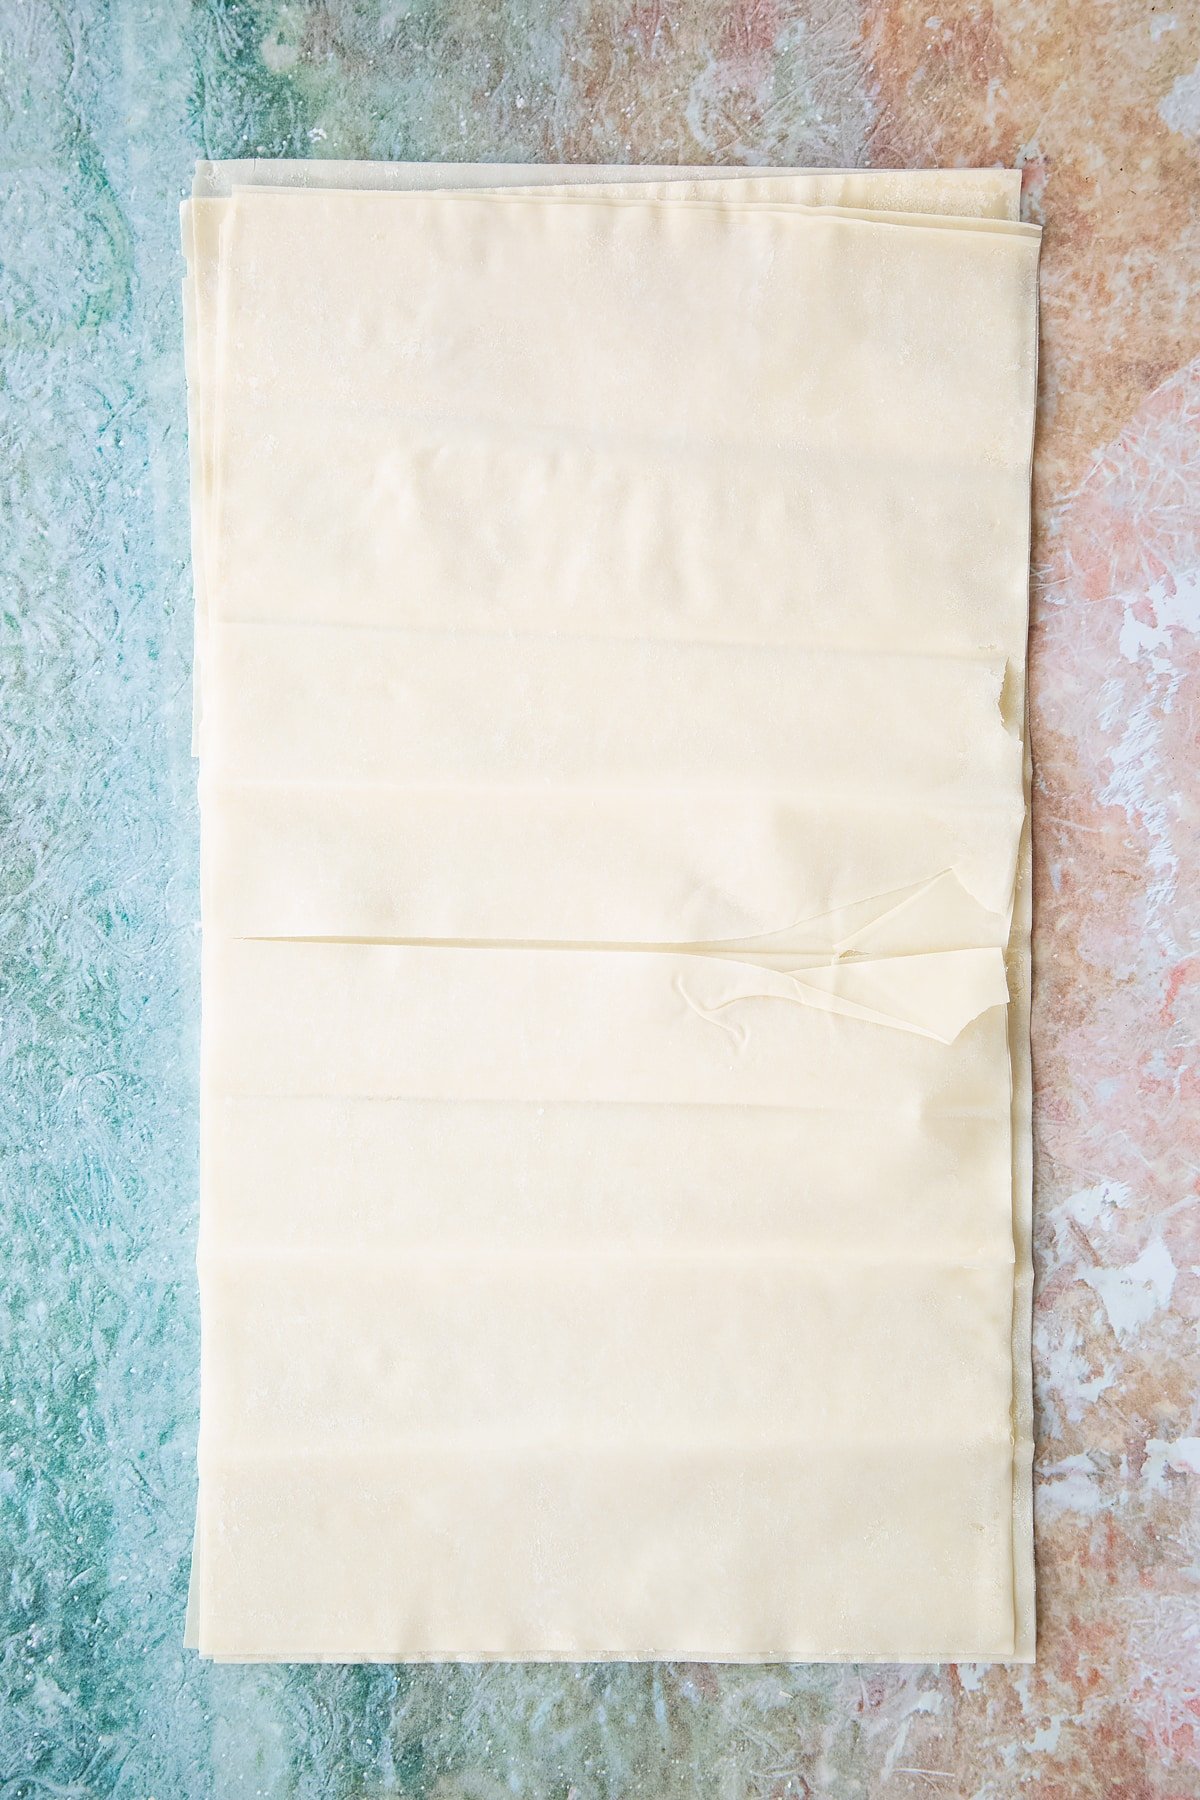 sheets of filo pastry layered up on a floured surface.